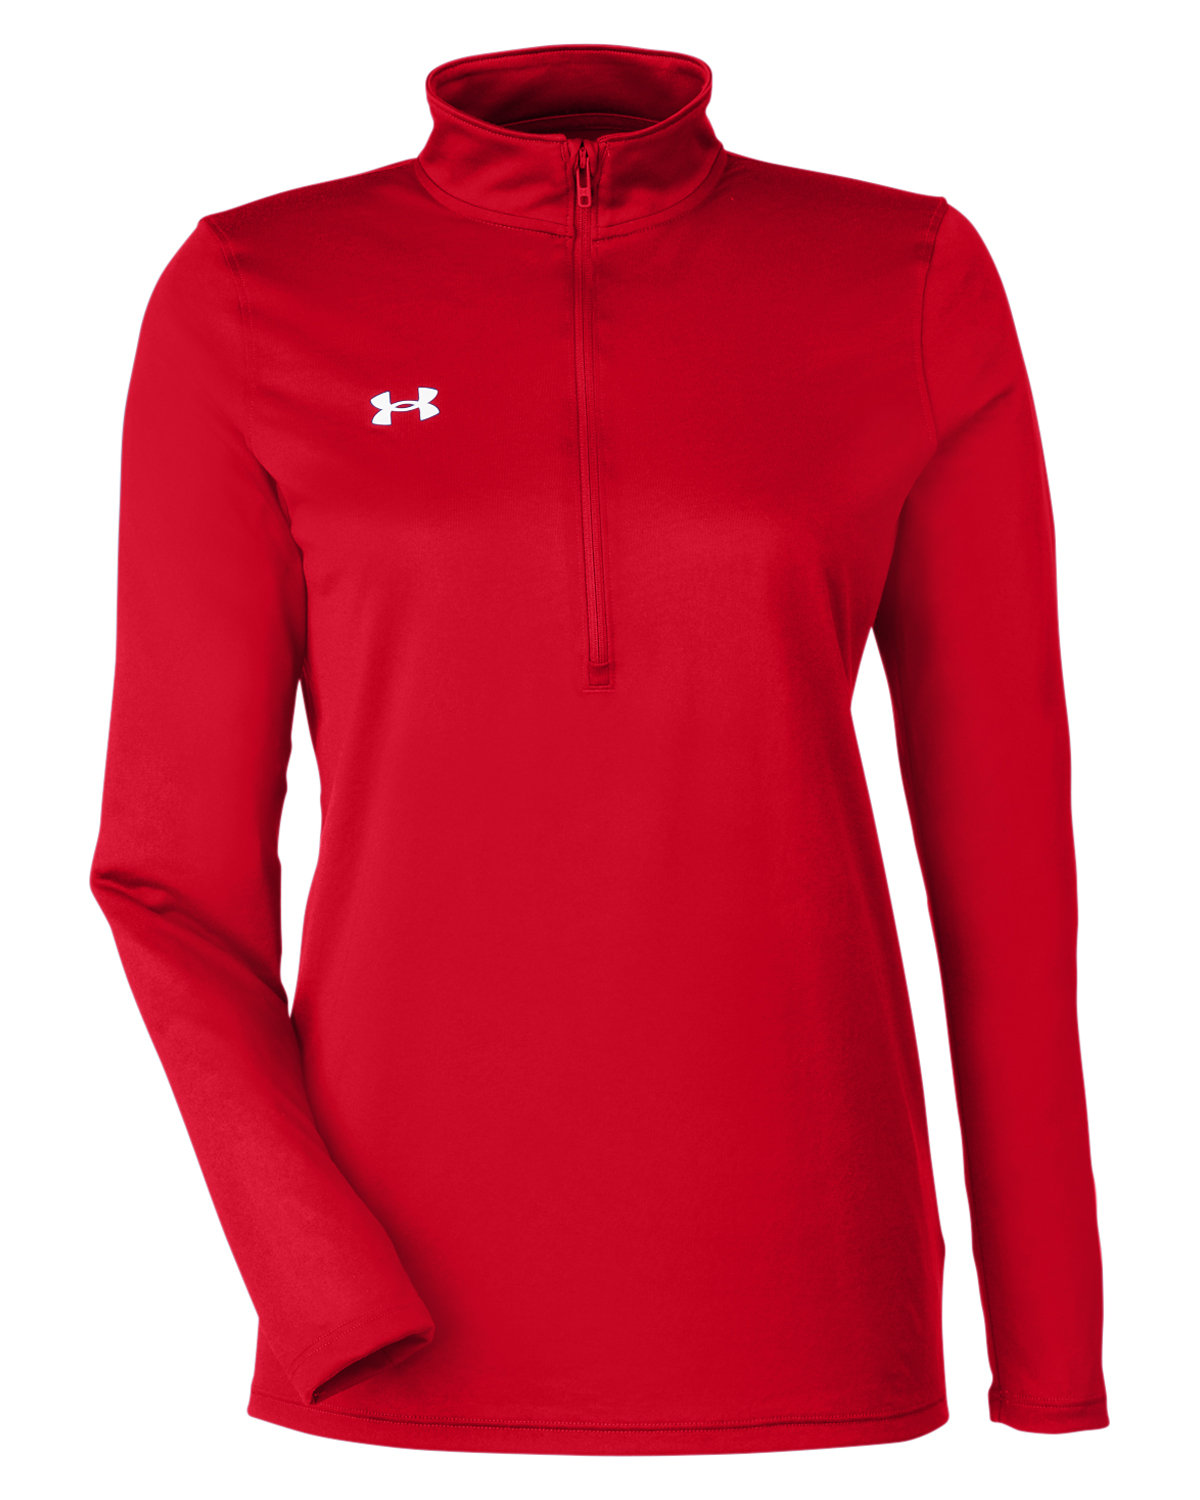 Custom Under Armour Apparel, Printed or Embroidered